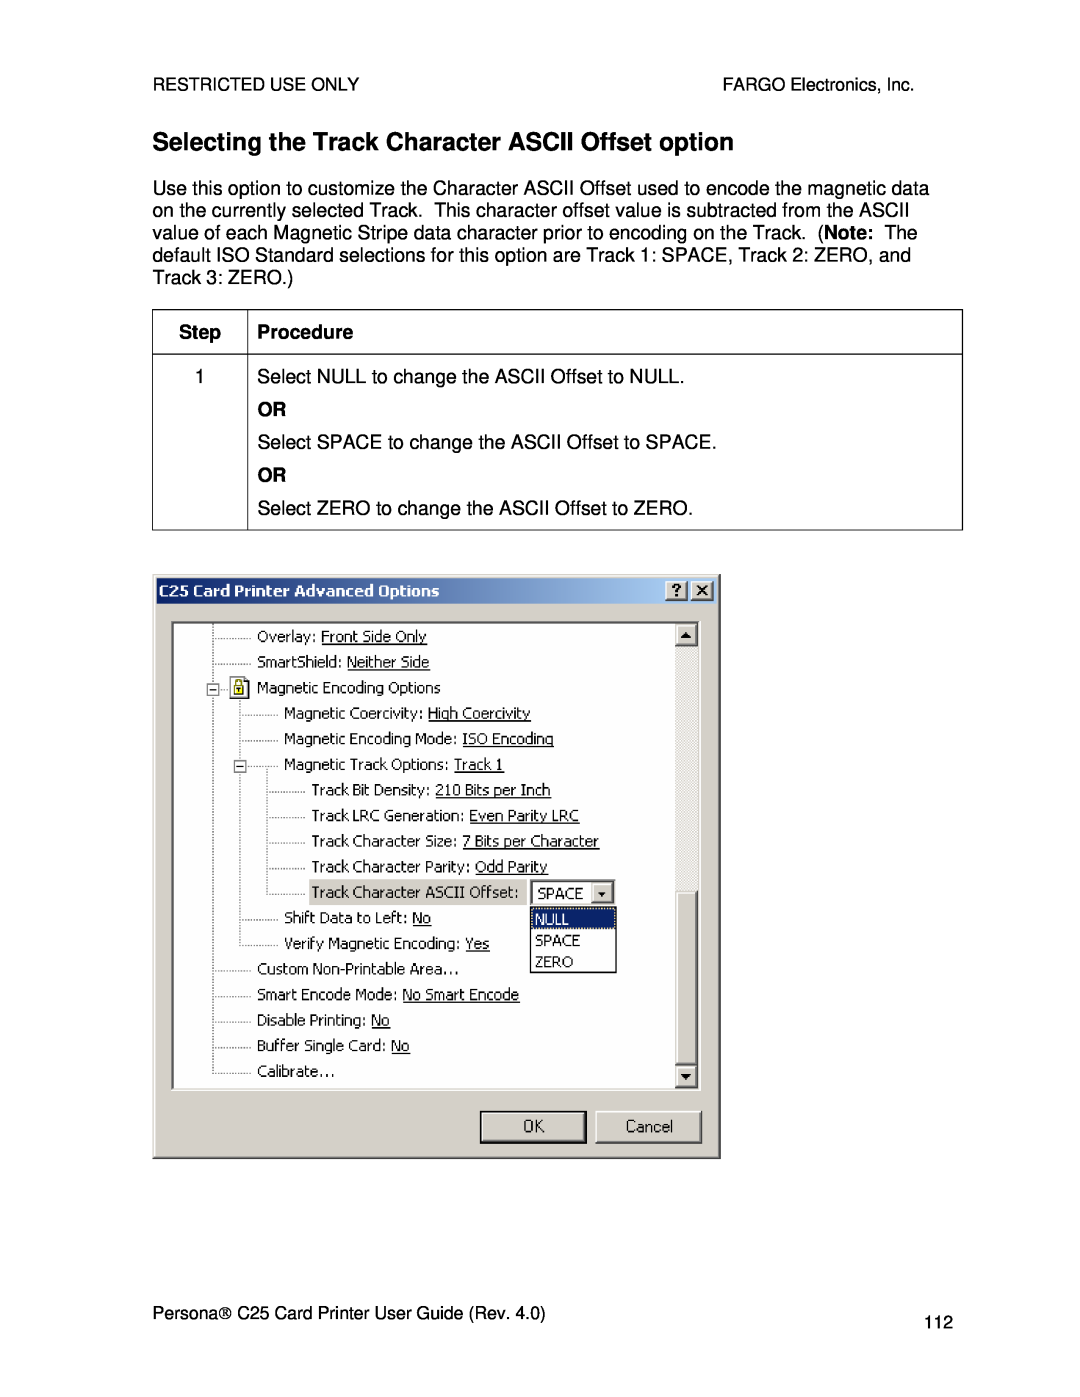 FARGO electronic S000256 manual Selecting the Track Character ASCII Offset option 